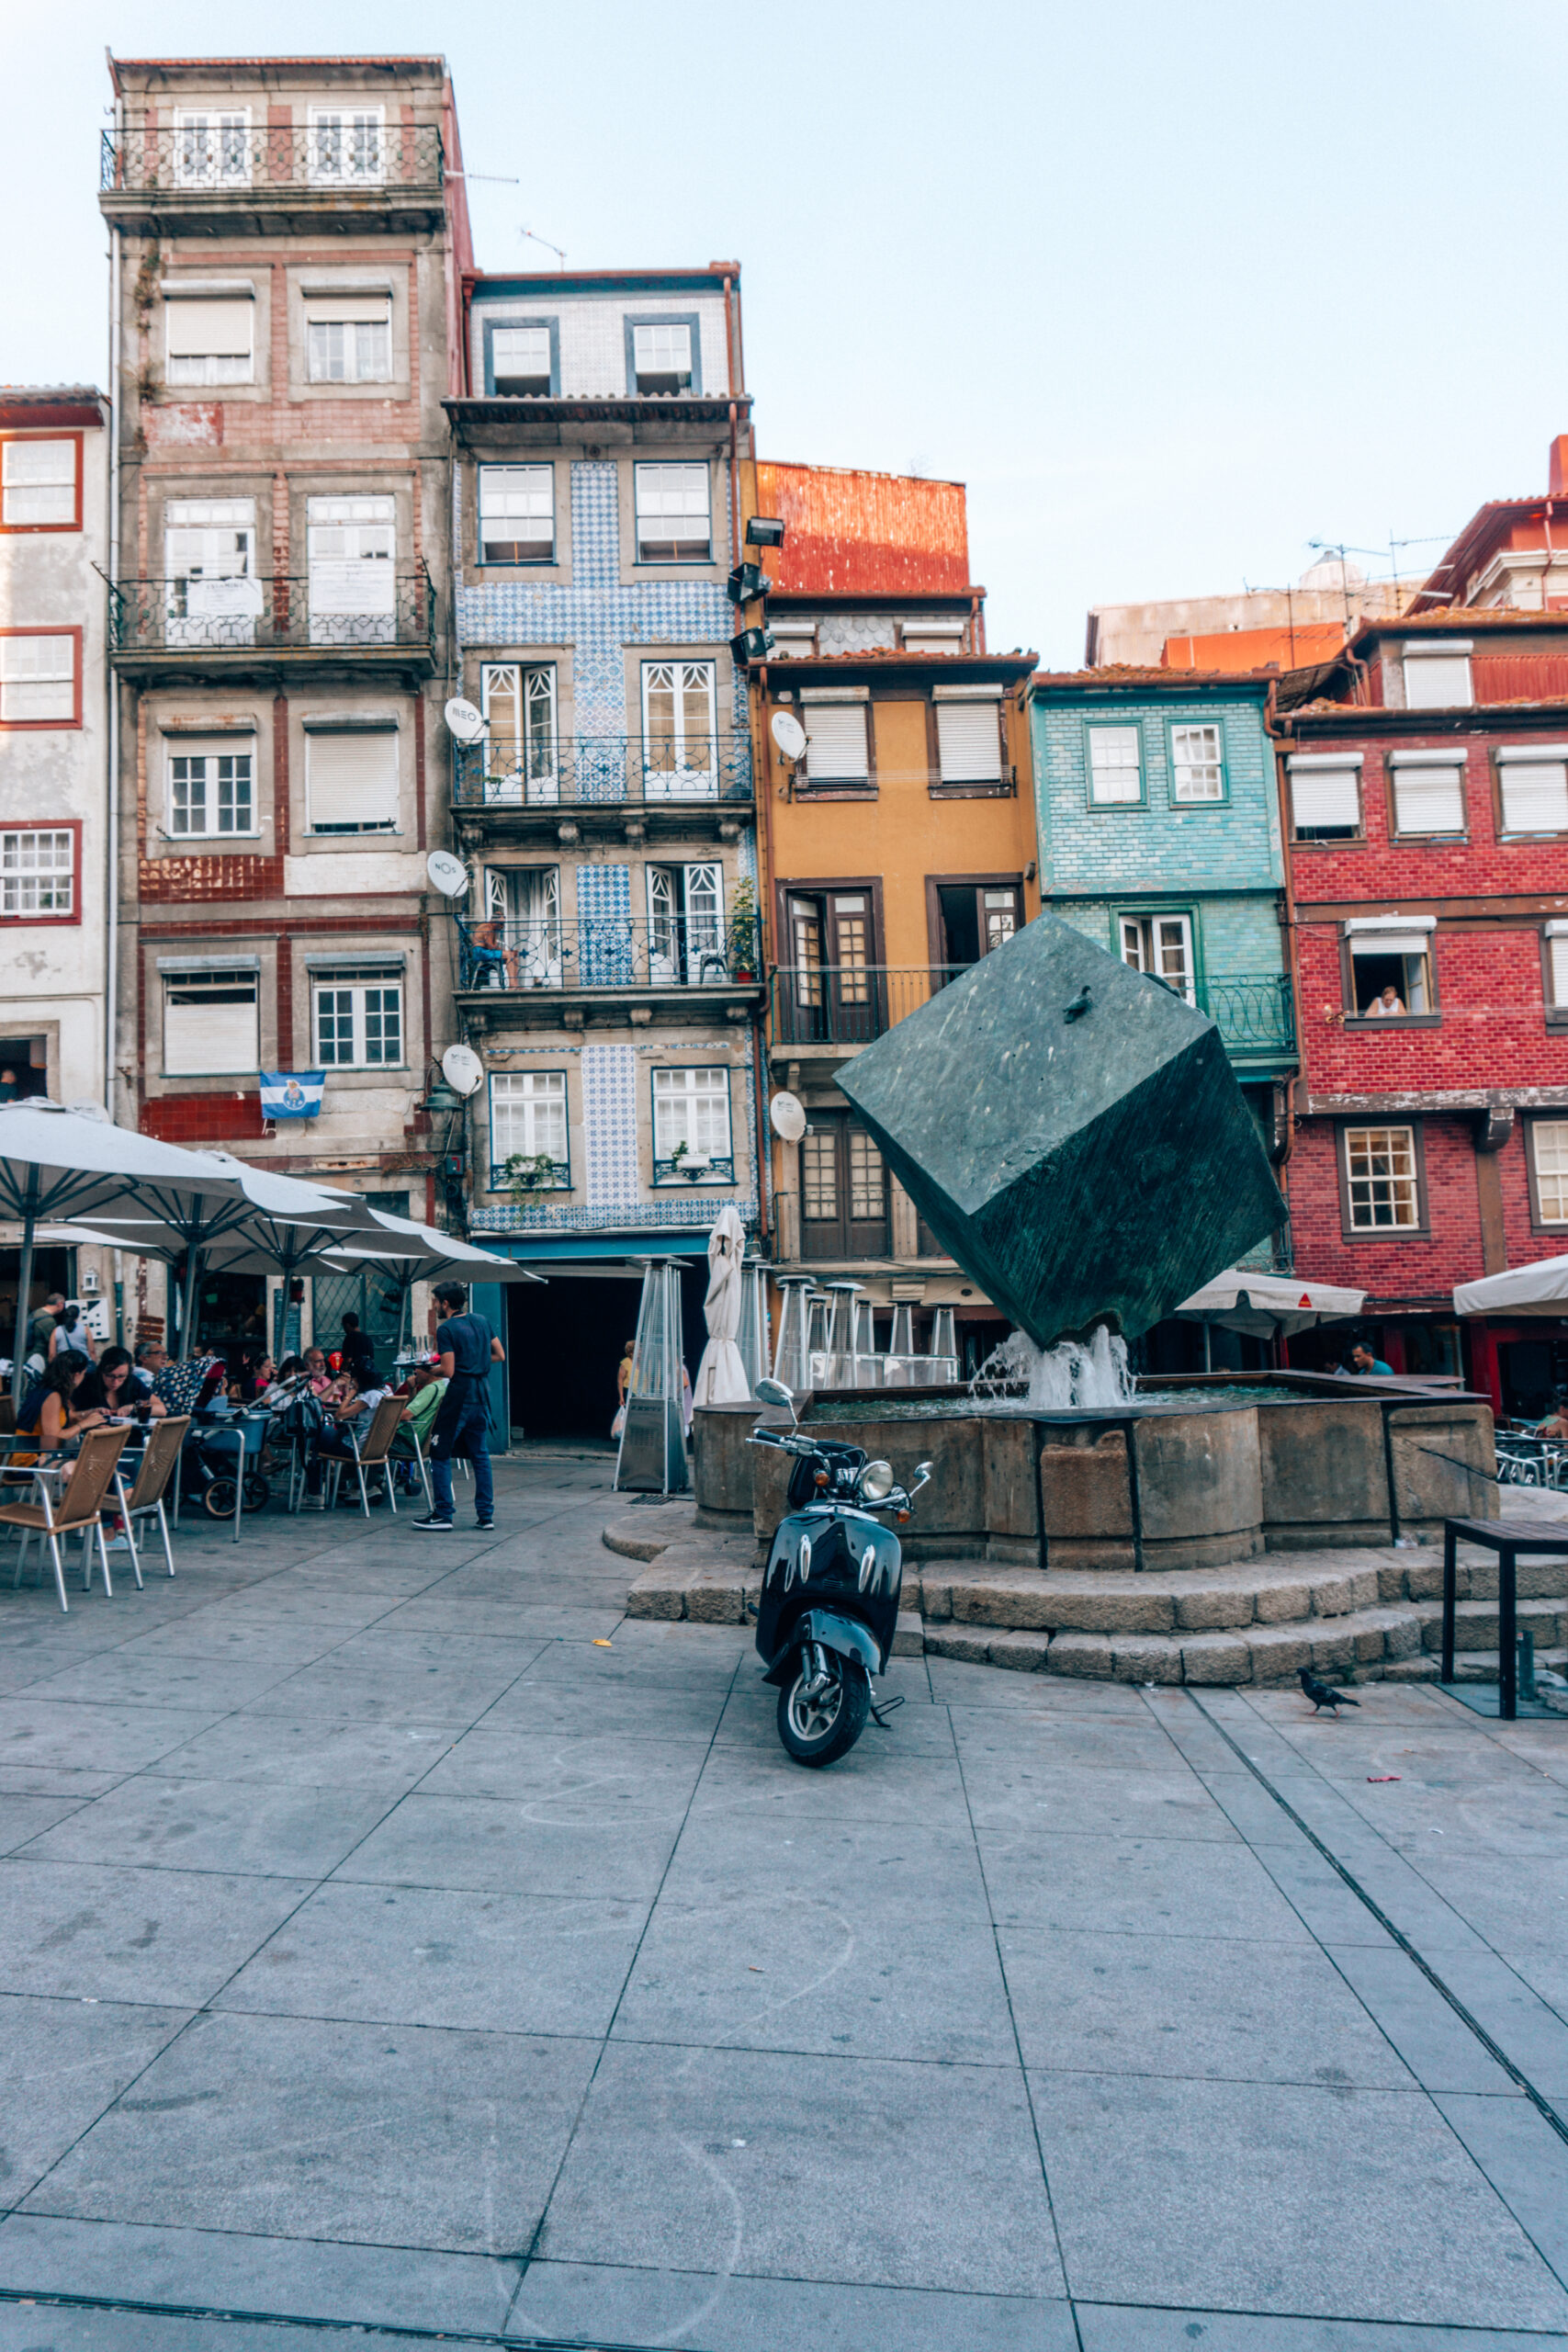 The charming square, and colourful tiled apartment buildings in Ribeira, historic centre of Porto, Portugal.